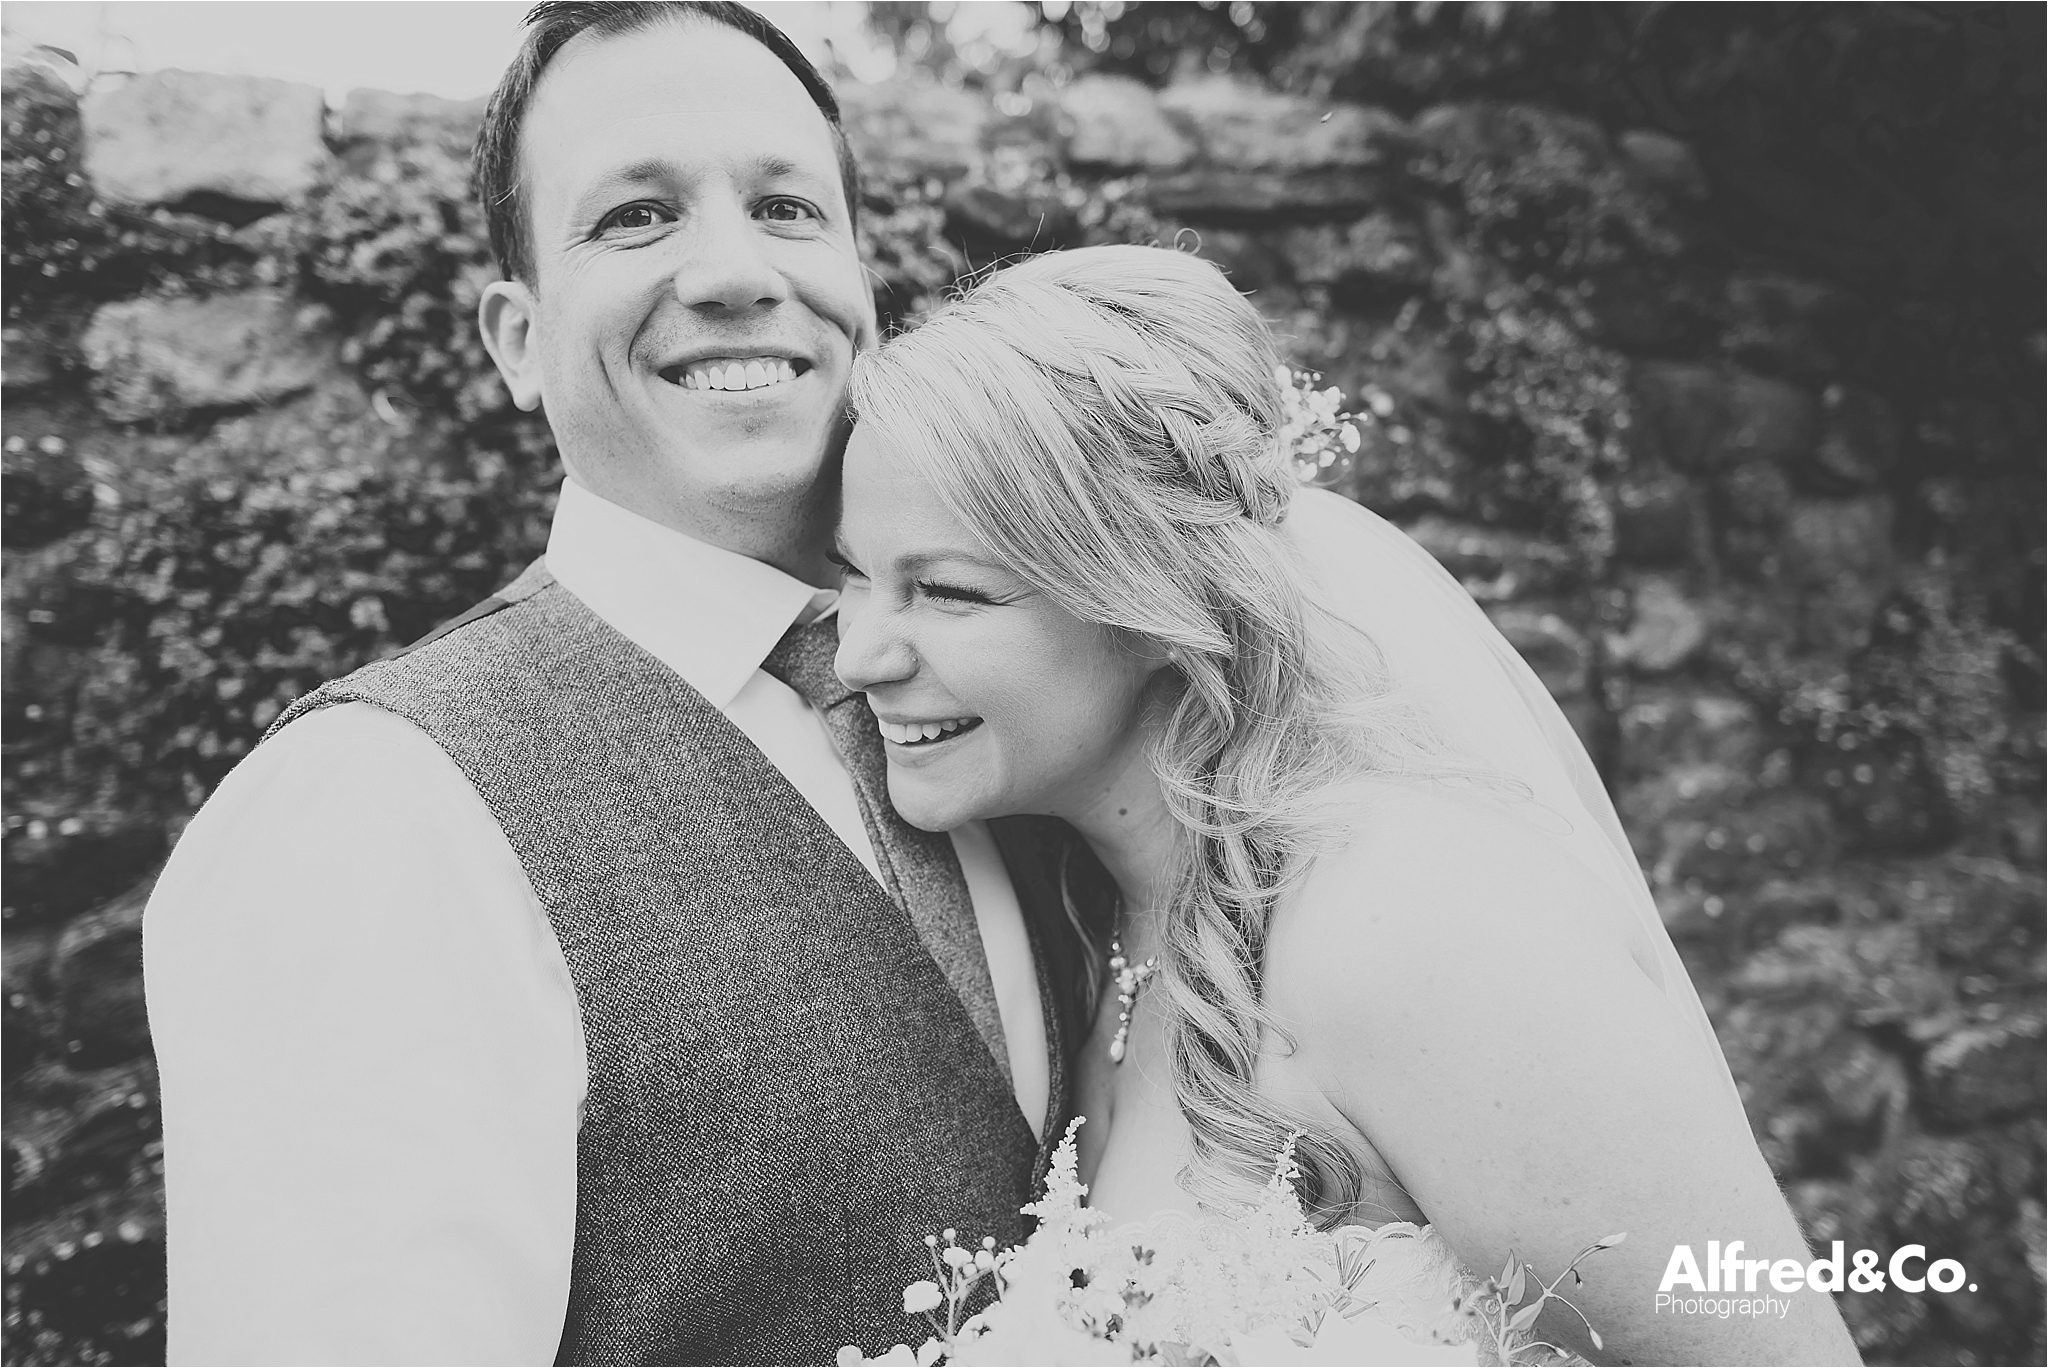 relaxed wedding photography in clitheroe lancashire 